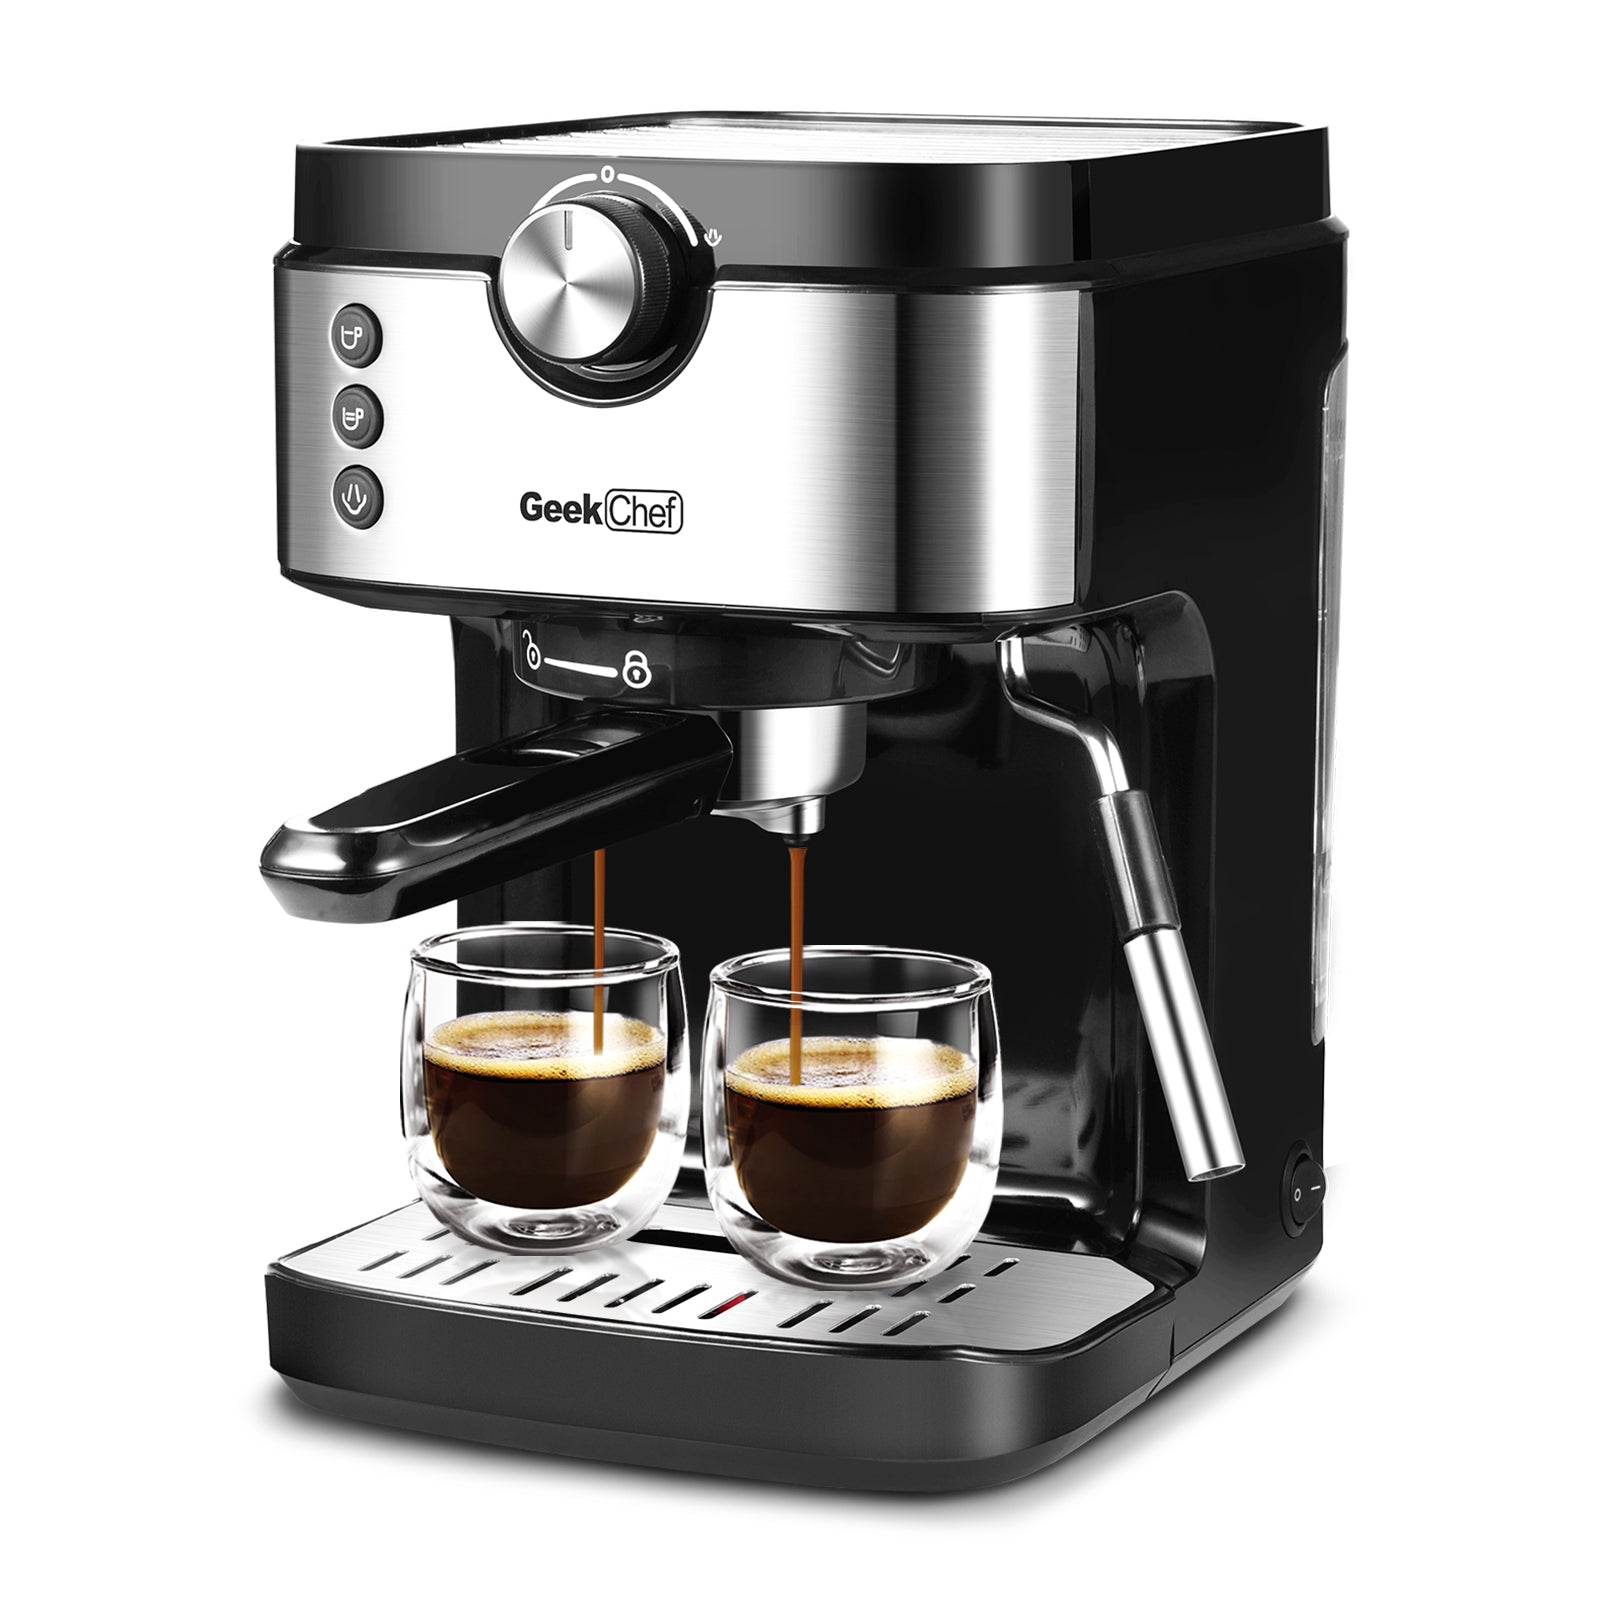 Fully Automatic Espresso Machine, Segmart 19 Bar Stainless Steel Automatic Coffee Maker with Automatic Cleaning Function, 20 Cup Espresso, Americano